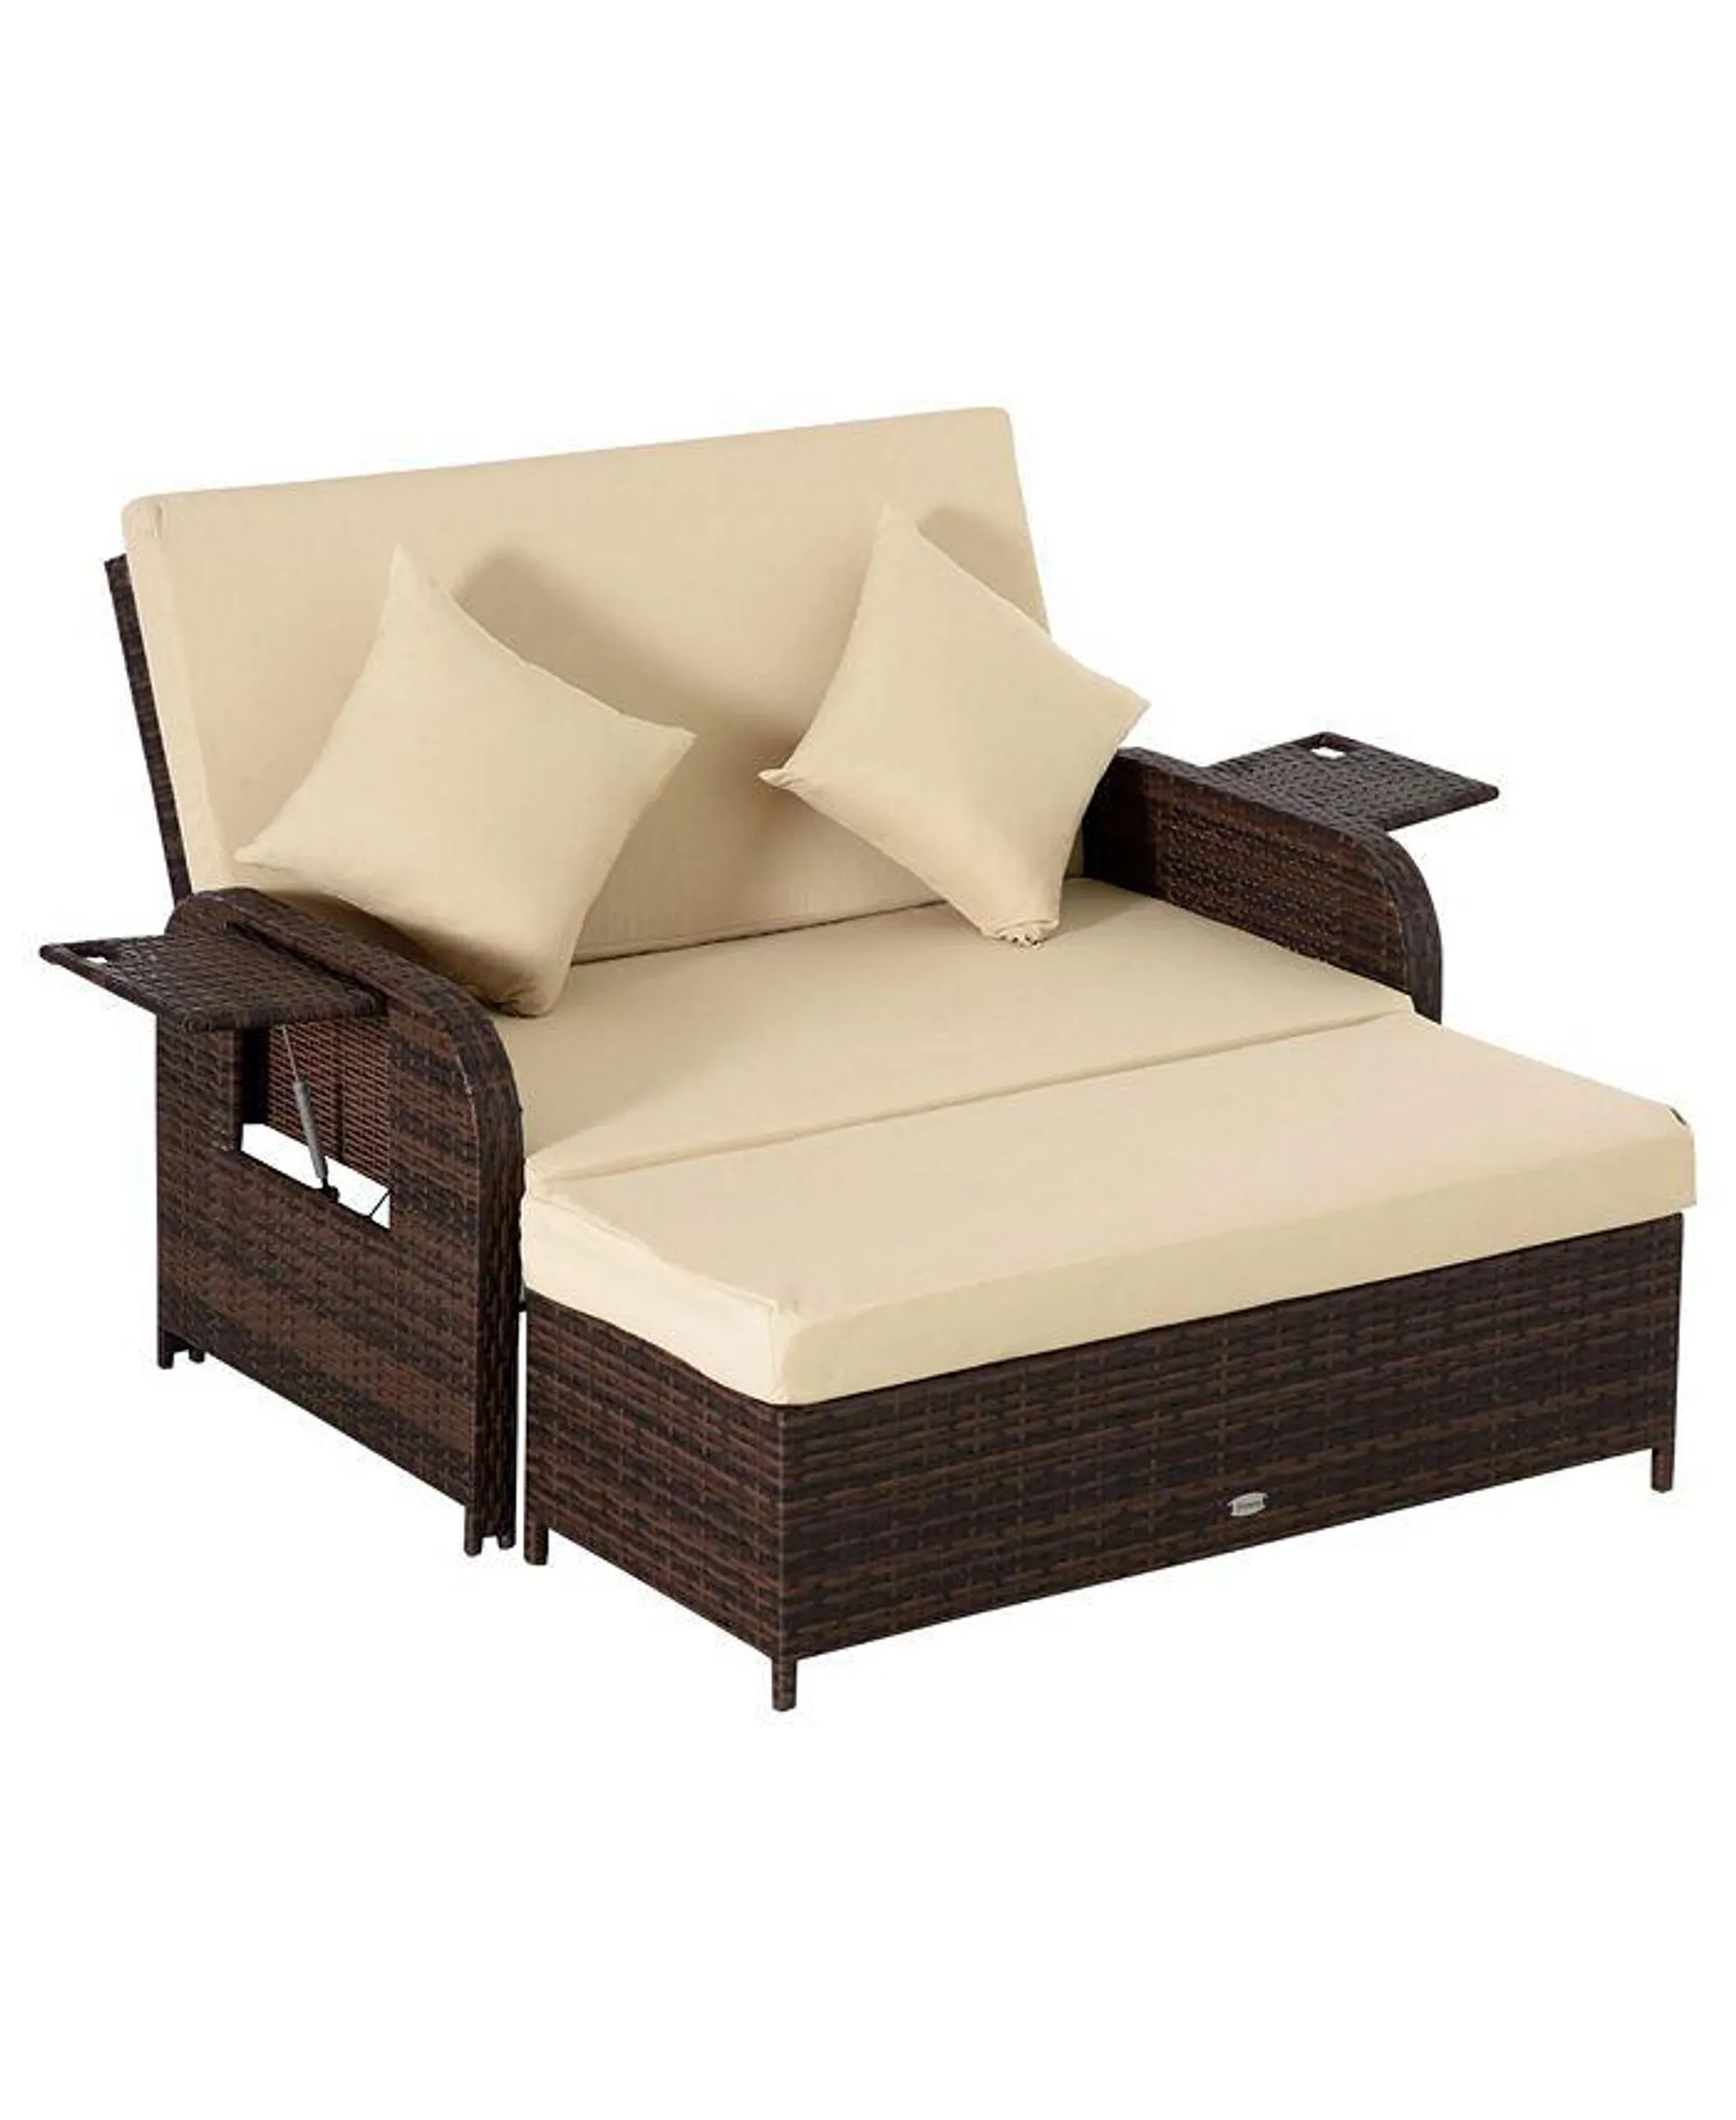 Patio Wicker Loveseat Sofa Set, Outdoor PE Rattan Garden Assembled Sun Lounger Daybed Furniture, w/ Storage Ottoman & Side Tables/ Drink Trays for Poolside, Porch, Backyard, Beige